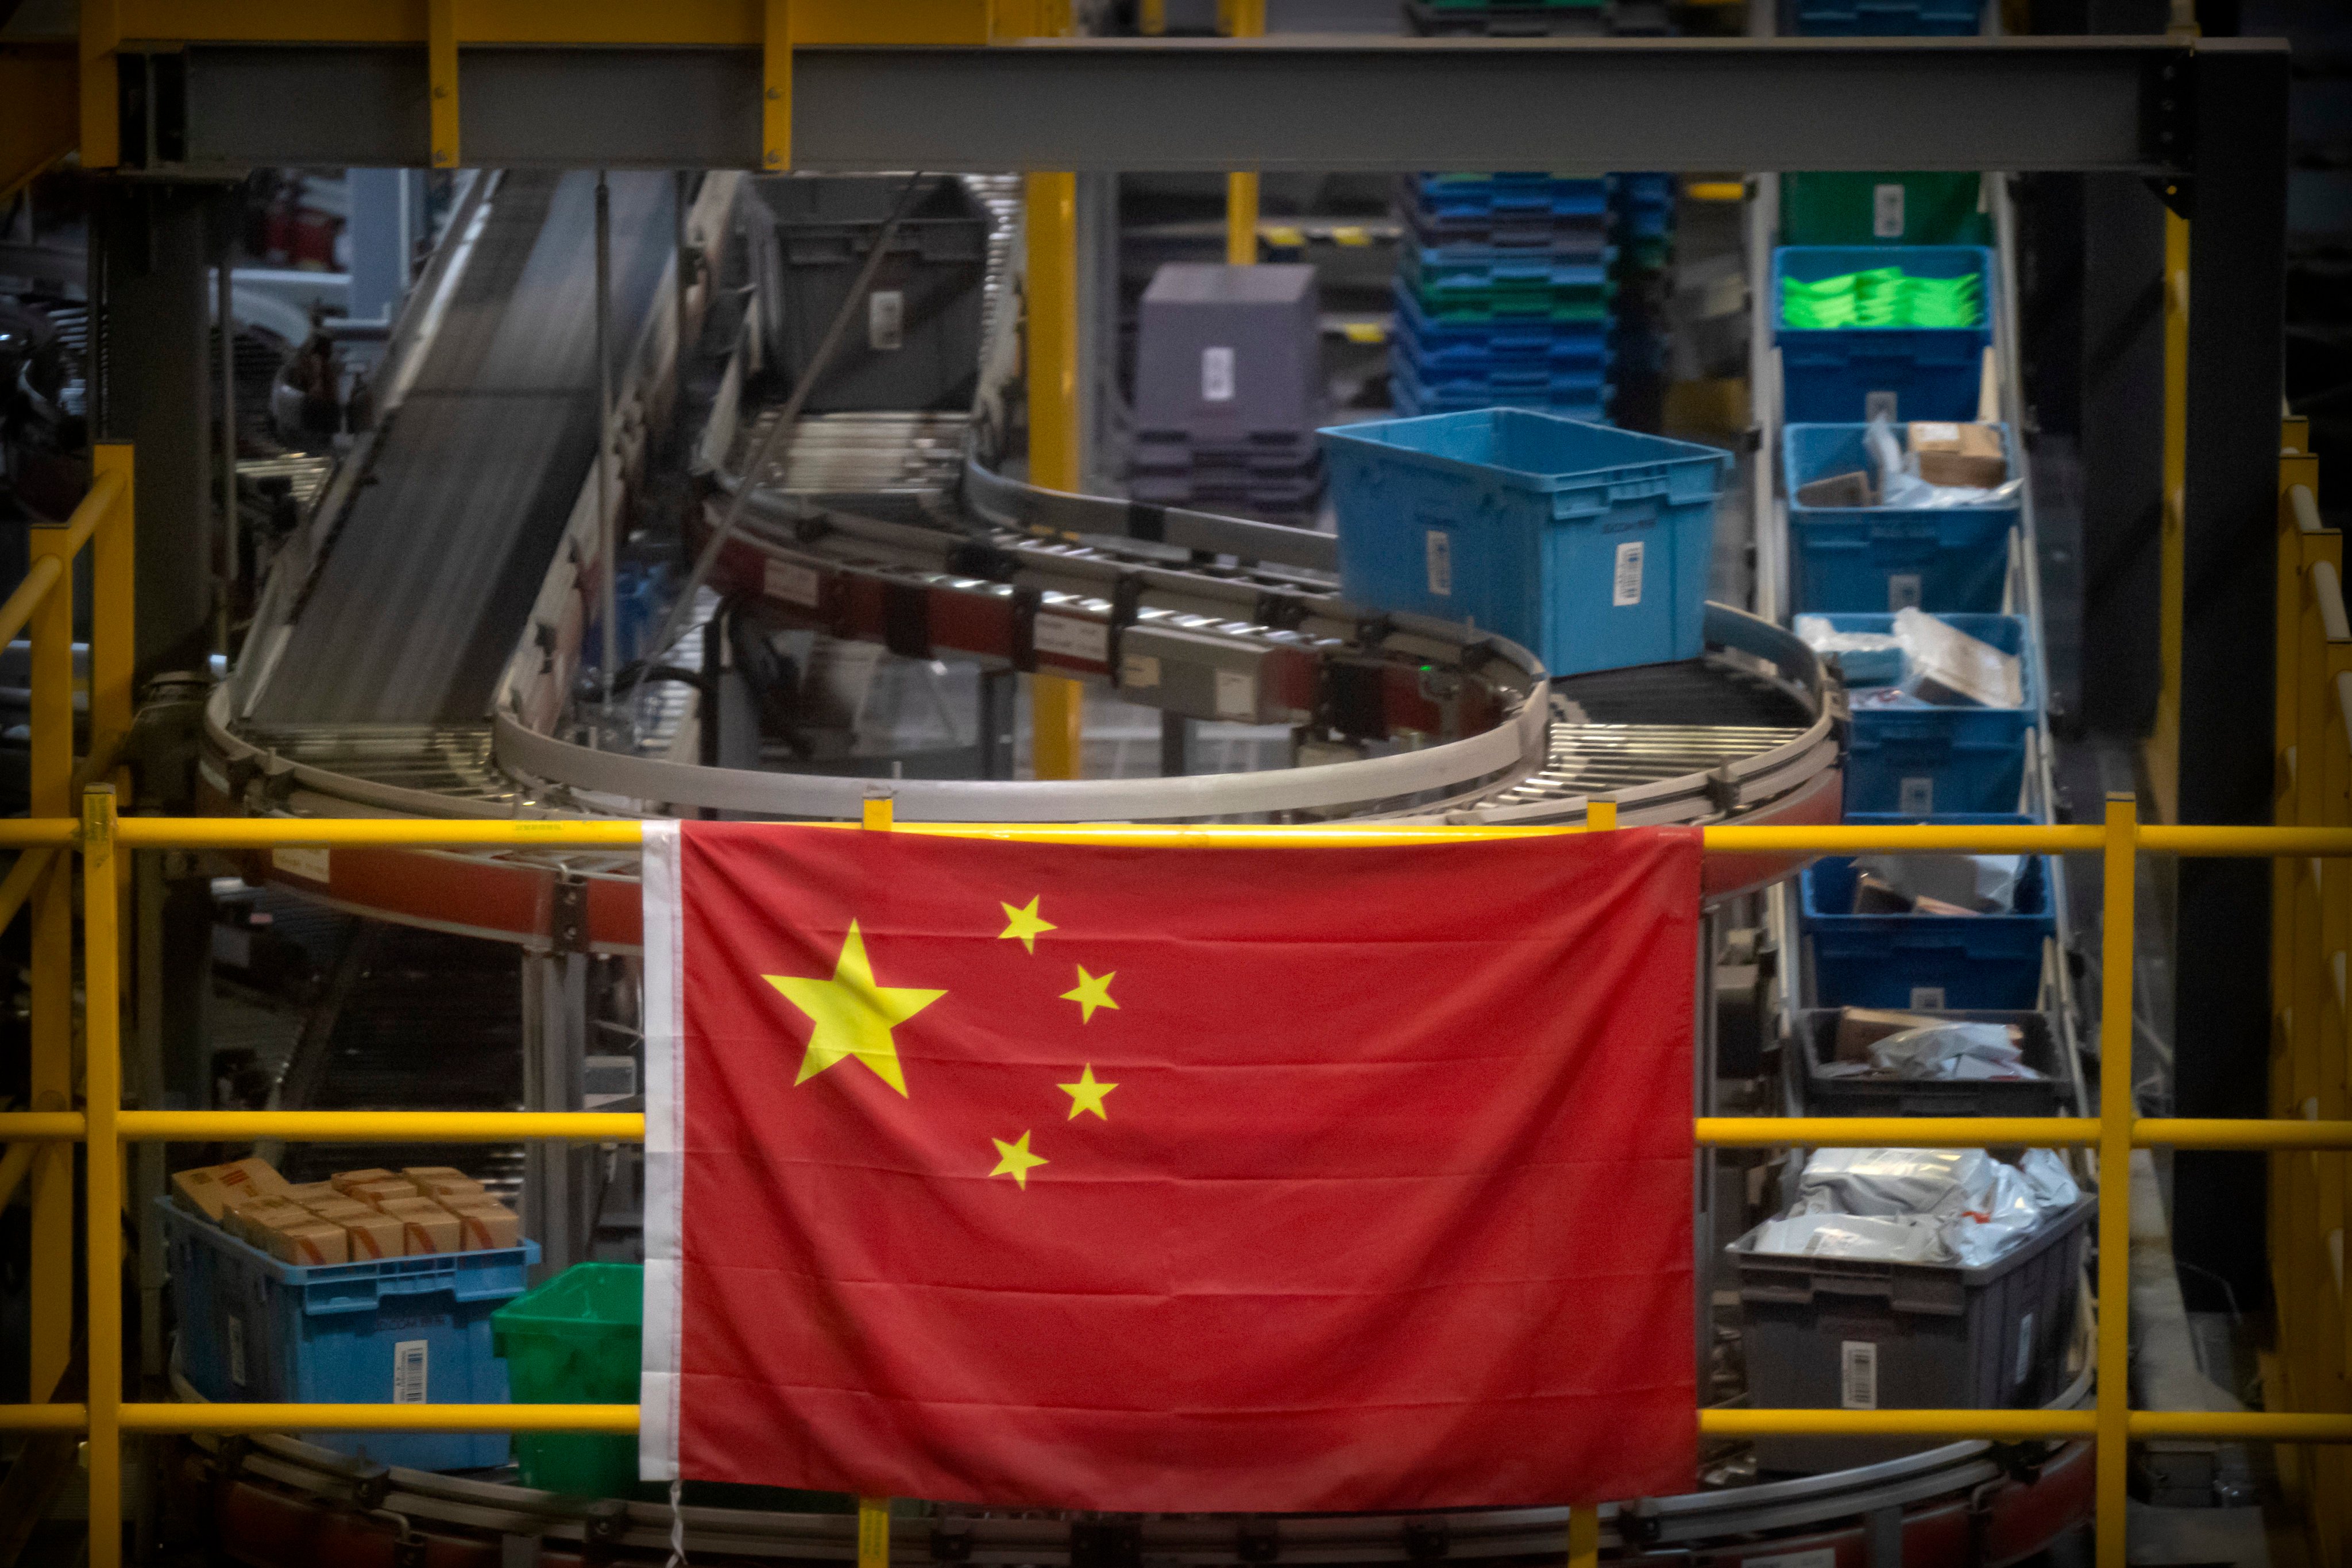 As China sticks to its zero-Covid policy, there are growing concerns over supply-chain disruptions, a mass exodus of foreign staff, and travel restrictions. Photo: AP